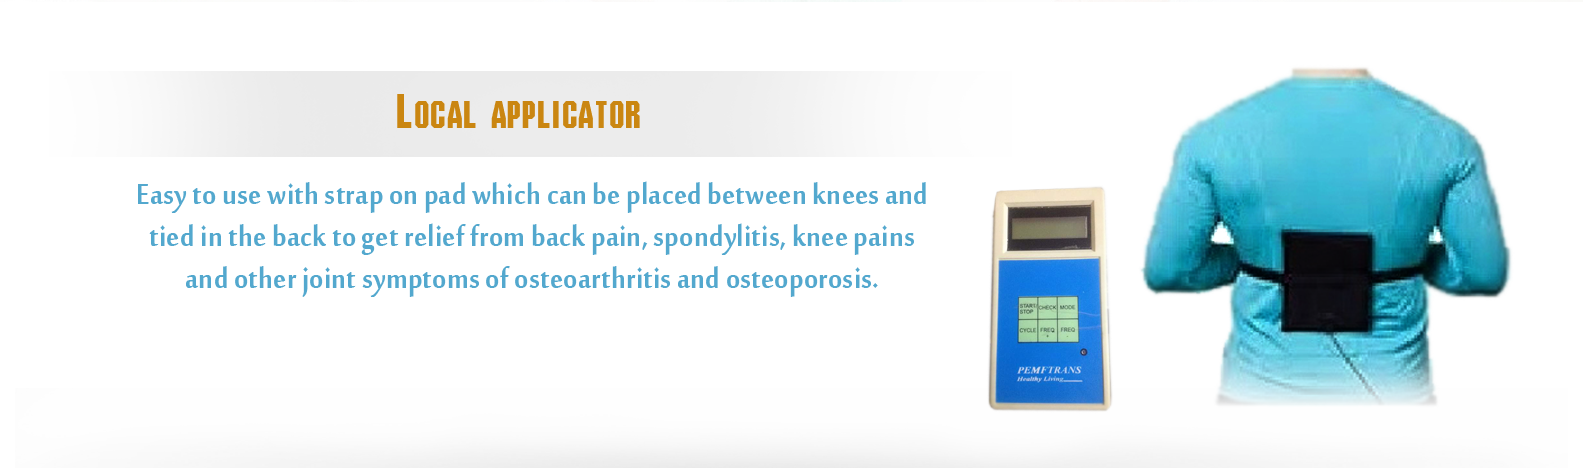 local pain relief machine - Local Applicator by PEMF India